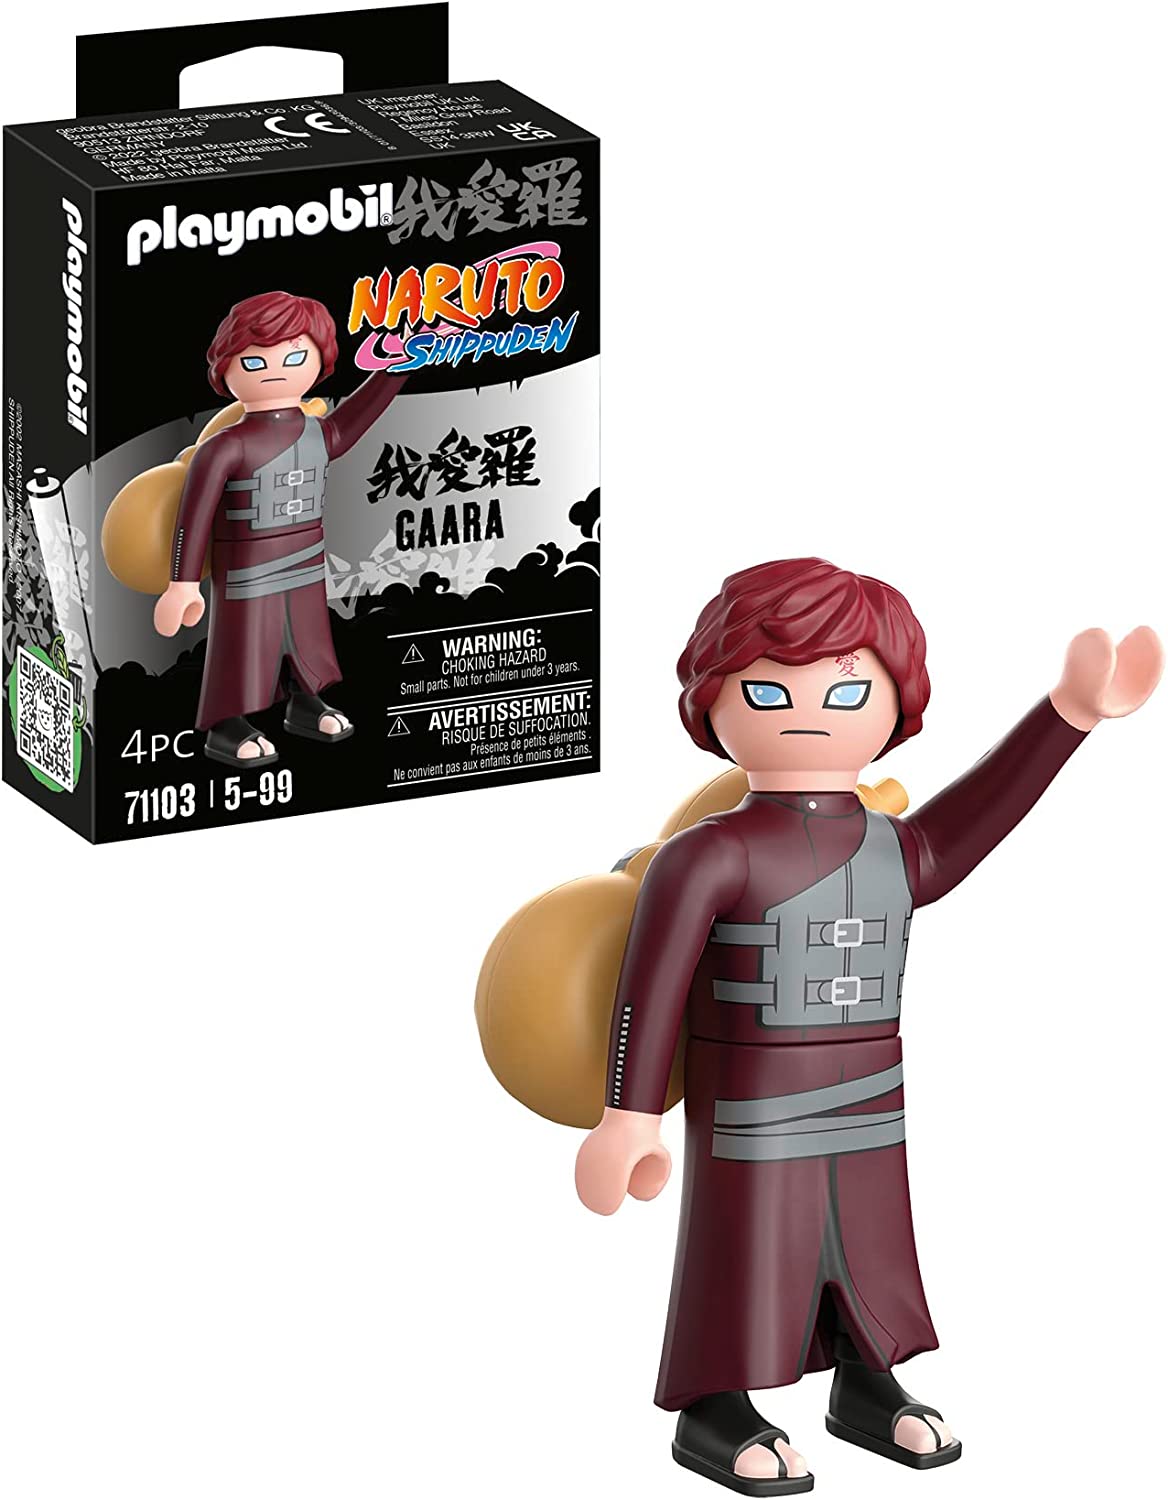 PLAYMOBIL Naruto Shippuden 71103 Gaara, Creative Fun for Anime Fans with Great Details and Authentic Extras, 4 Pieces, from 5 Years